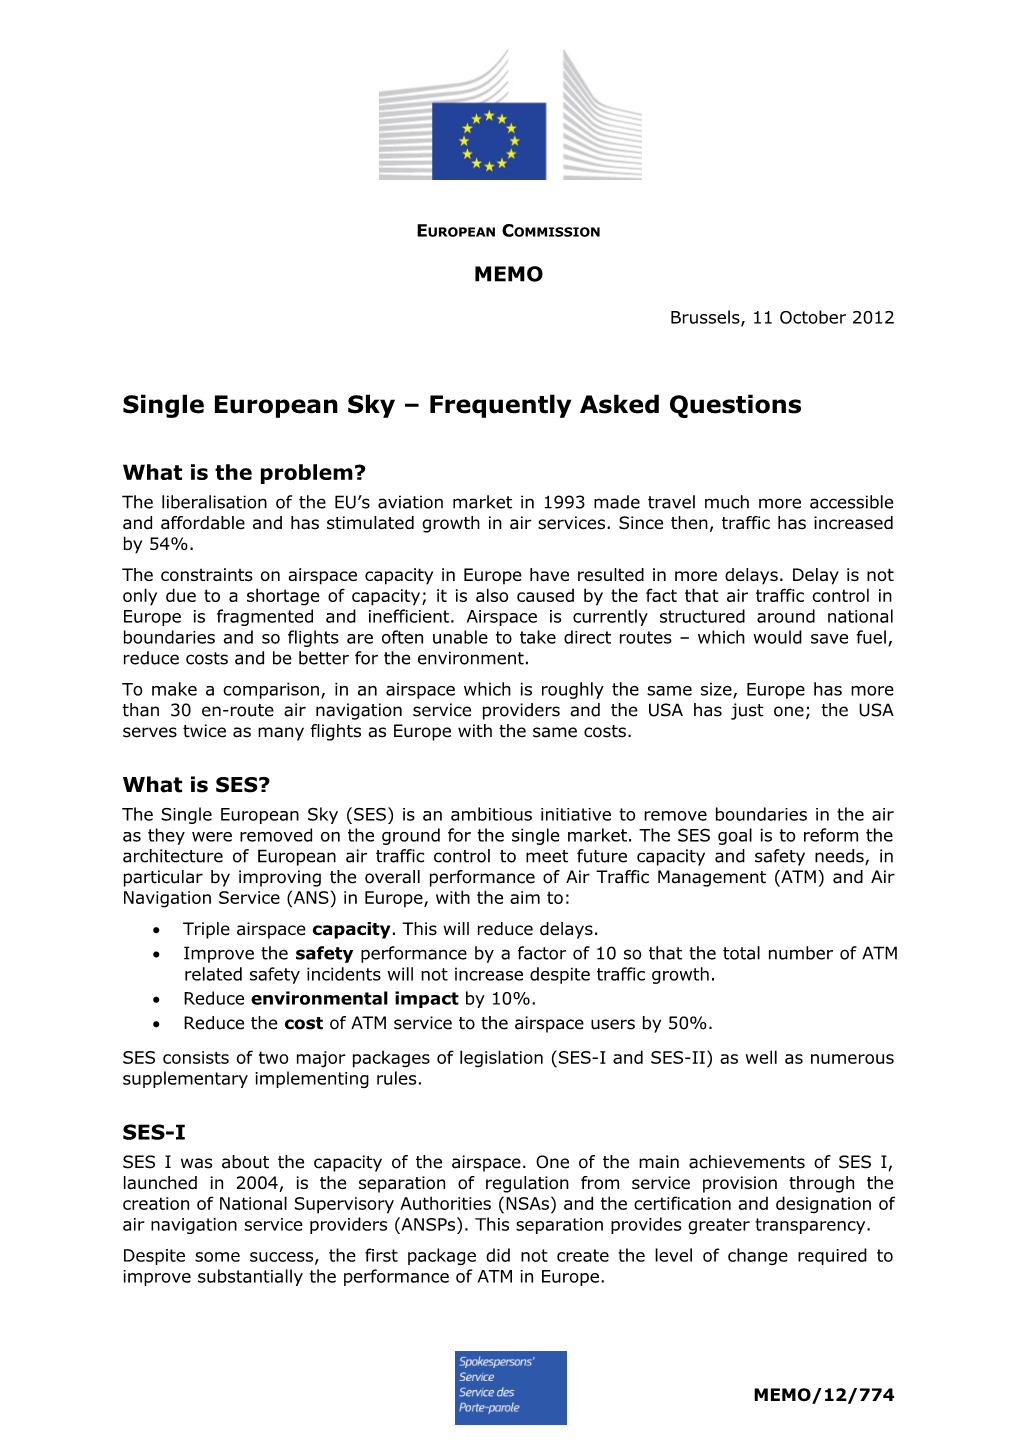 Single European Sky Frequently Asked Questions